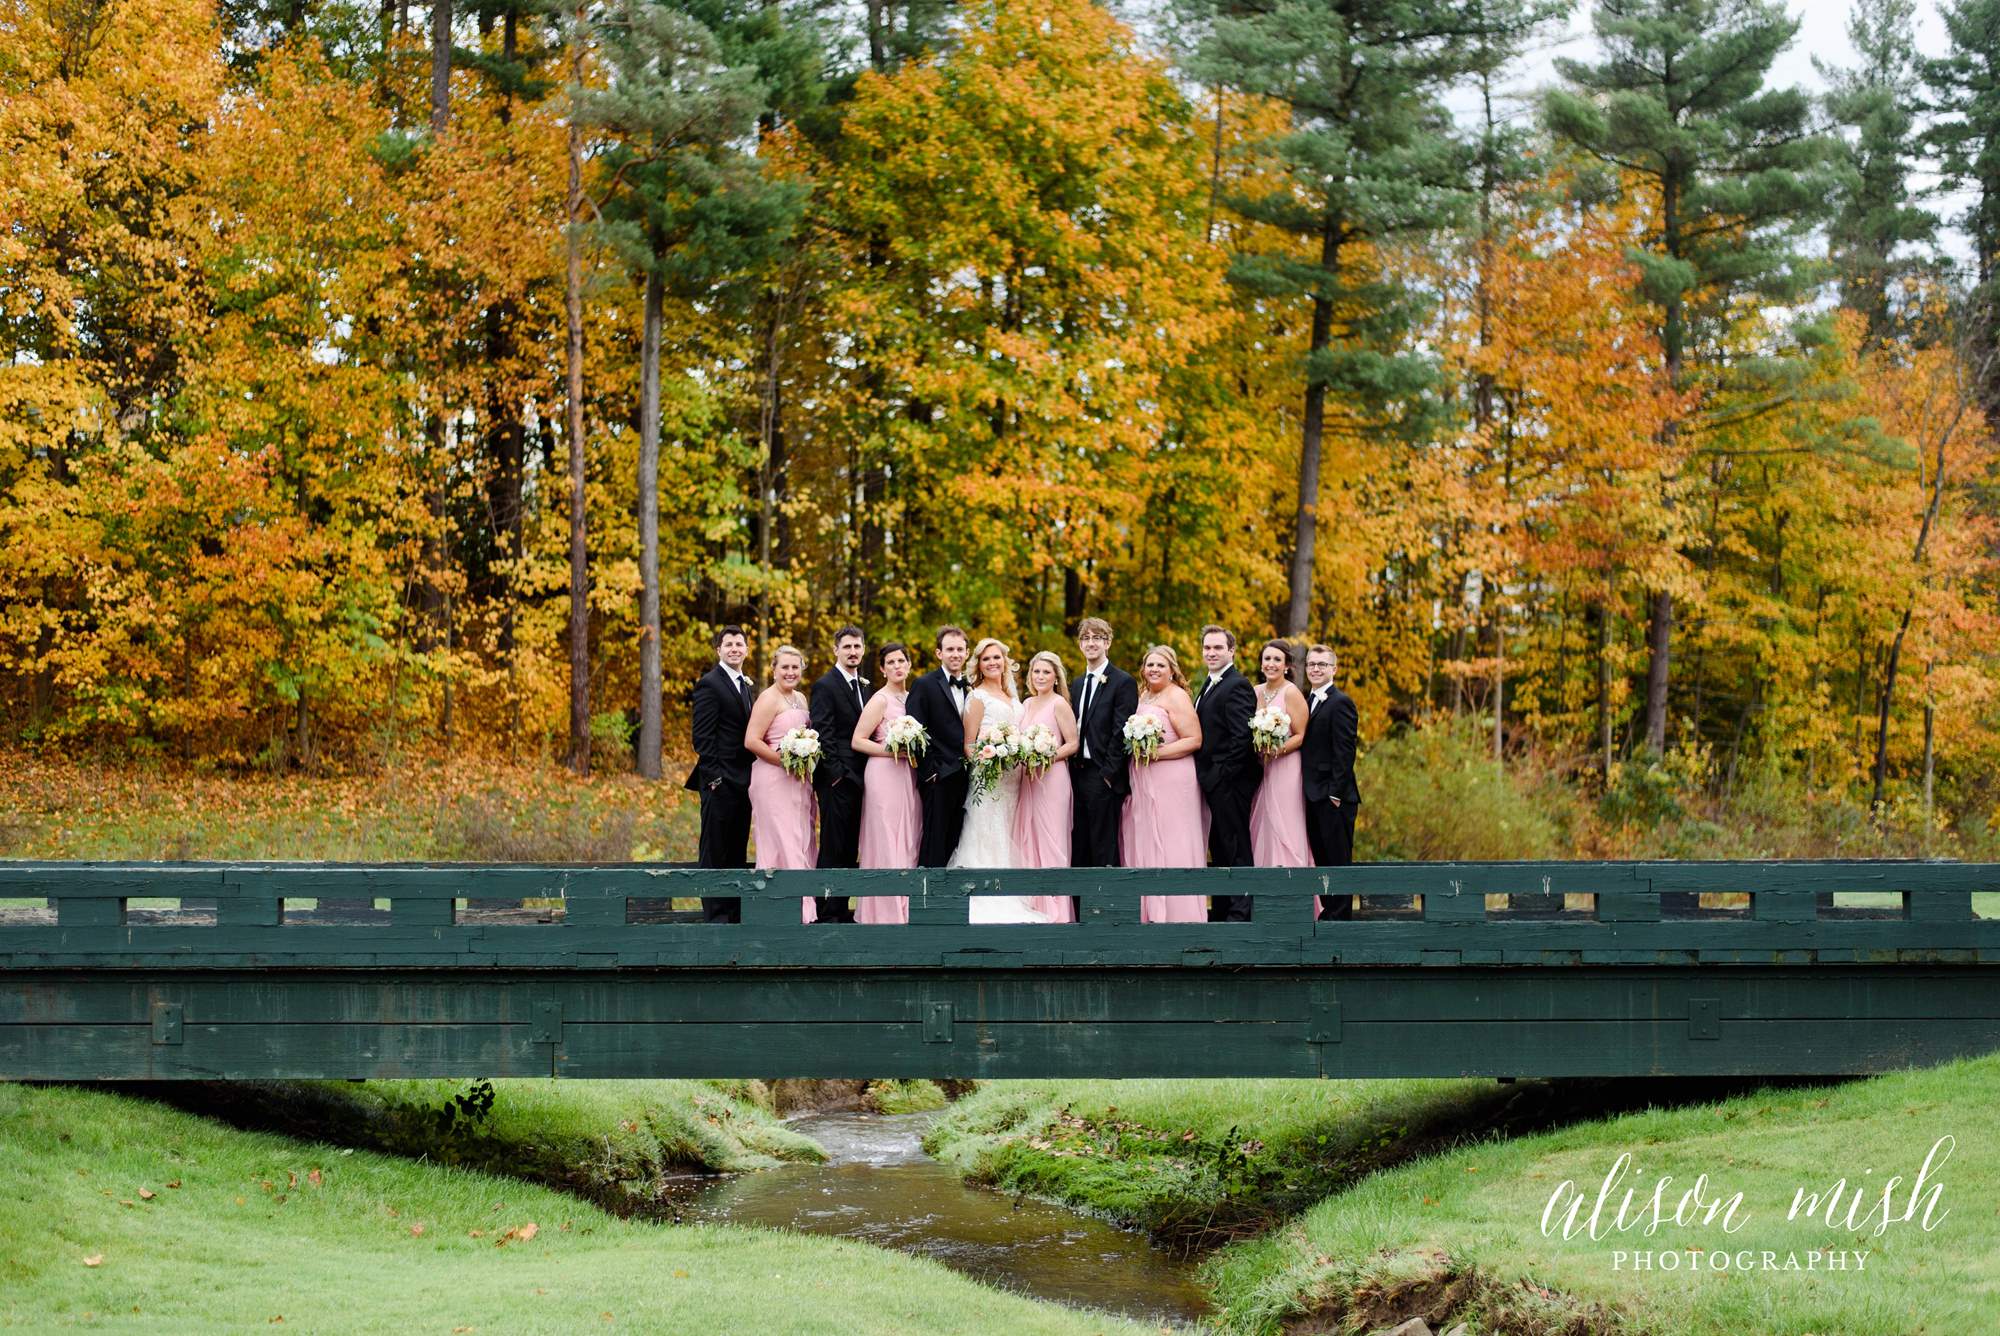 Alexa_and_Ryan-Bridal_Party-0018_with_Watermark